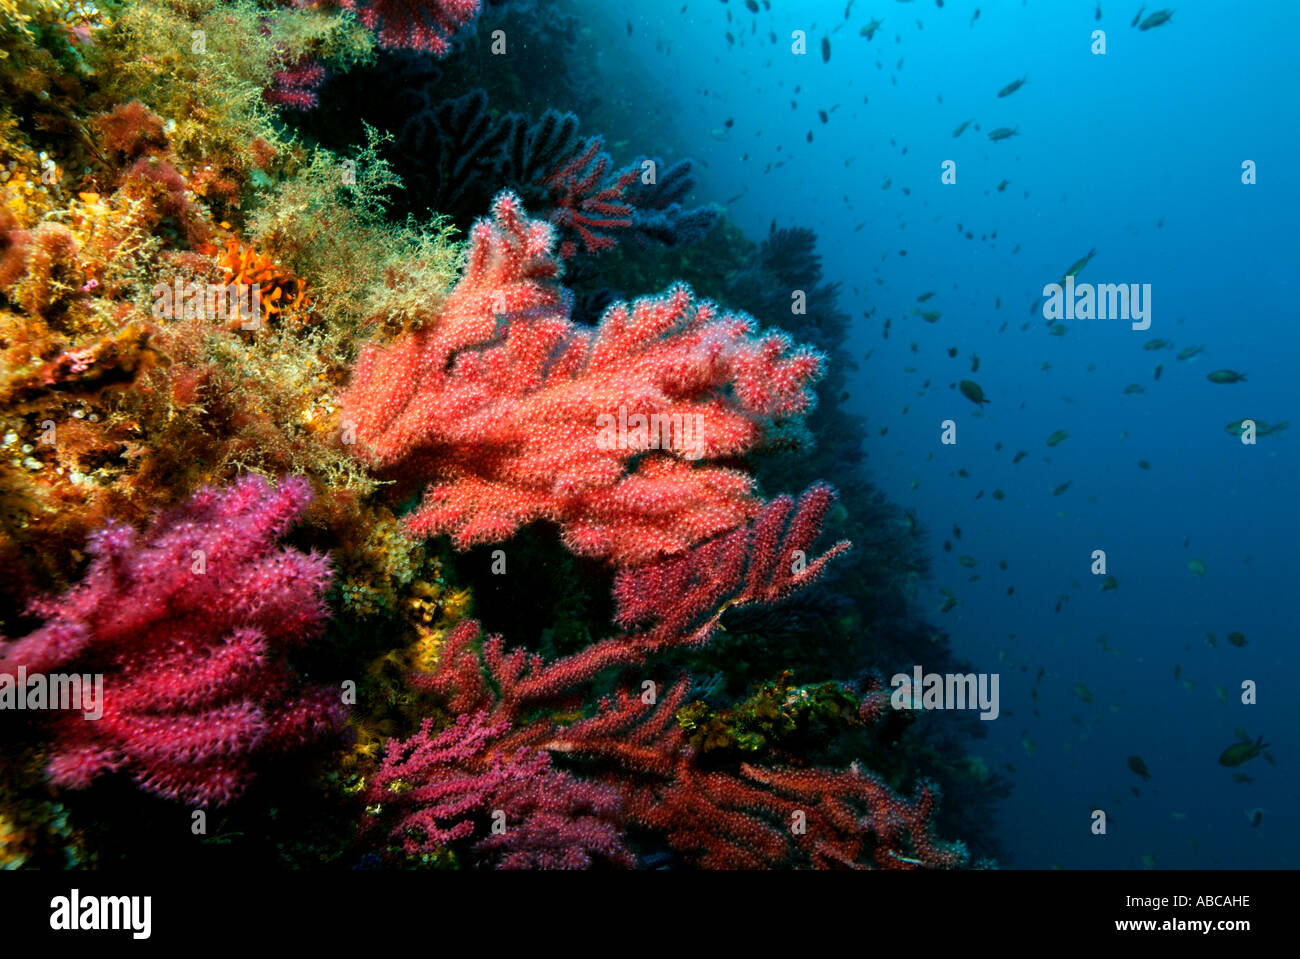 Red gorgonian (Alcyonium palmatum) on a coral reef Stock Photo